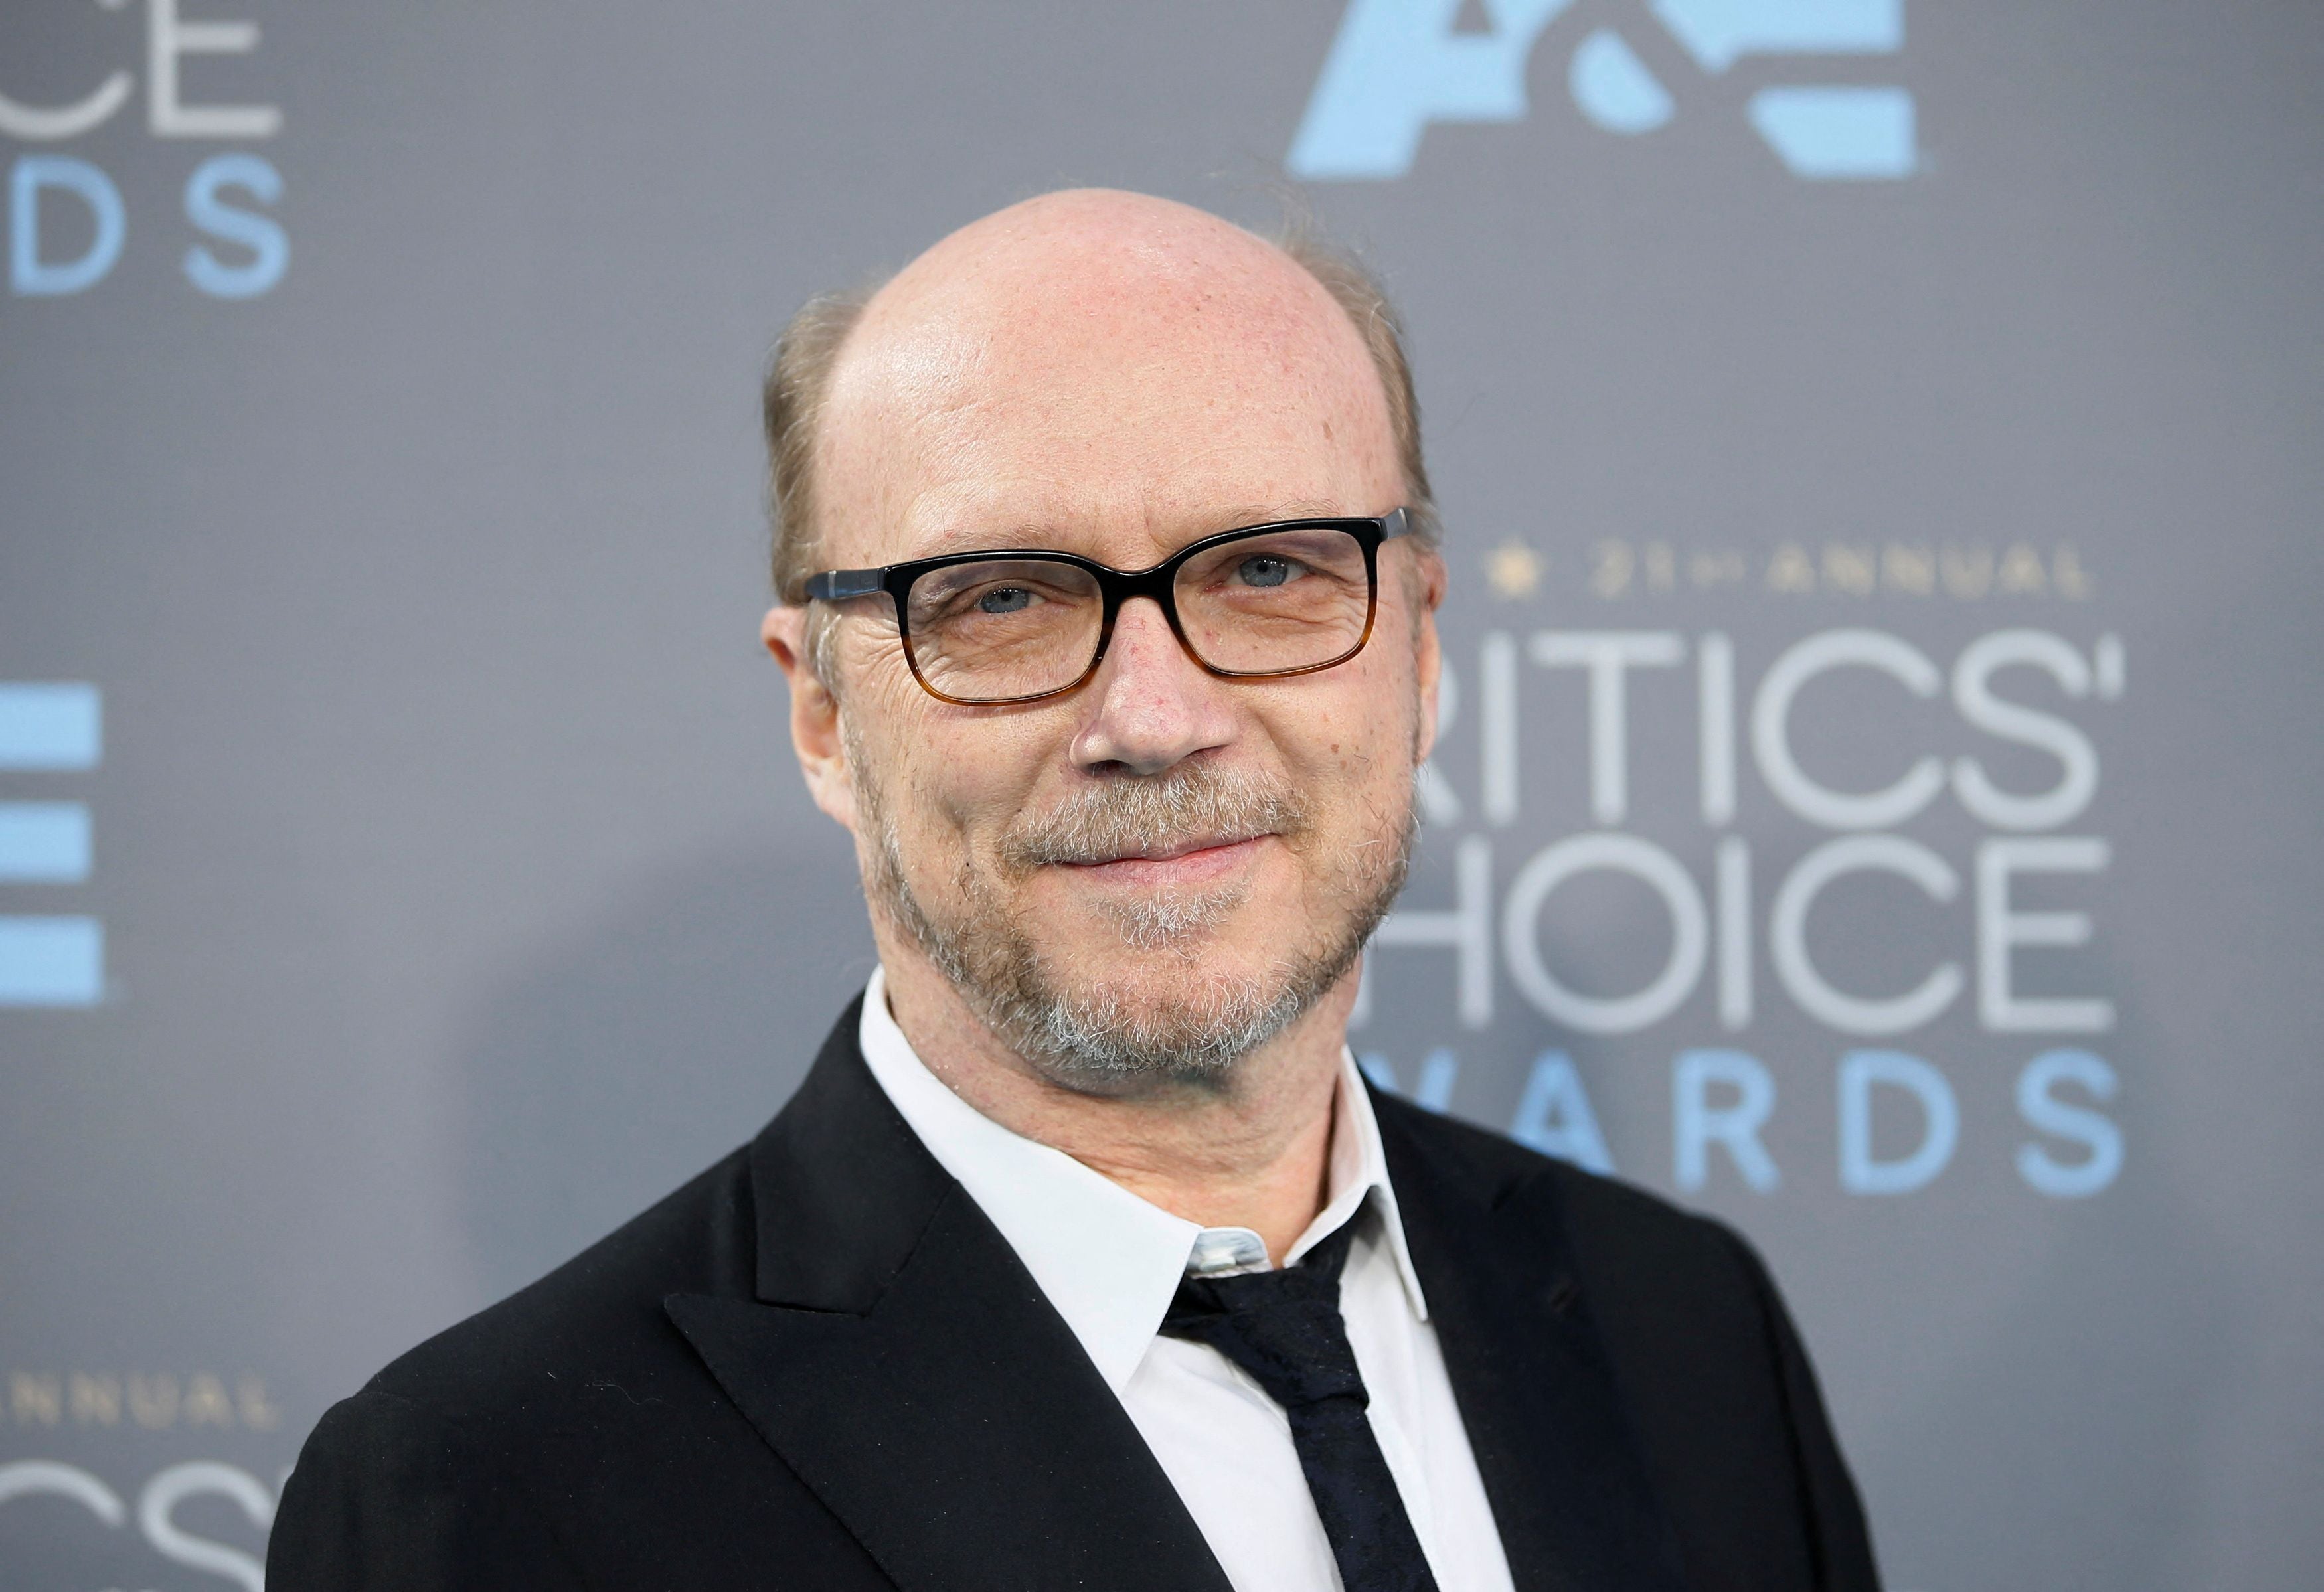 Paul Haggis co-wrote the Bond films Quantum of Solace and Casino Royale